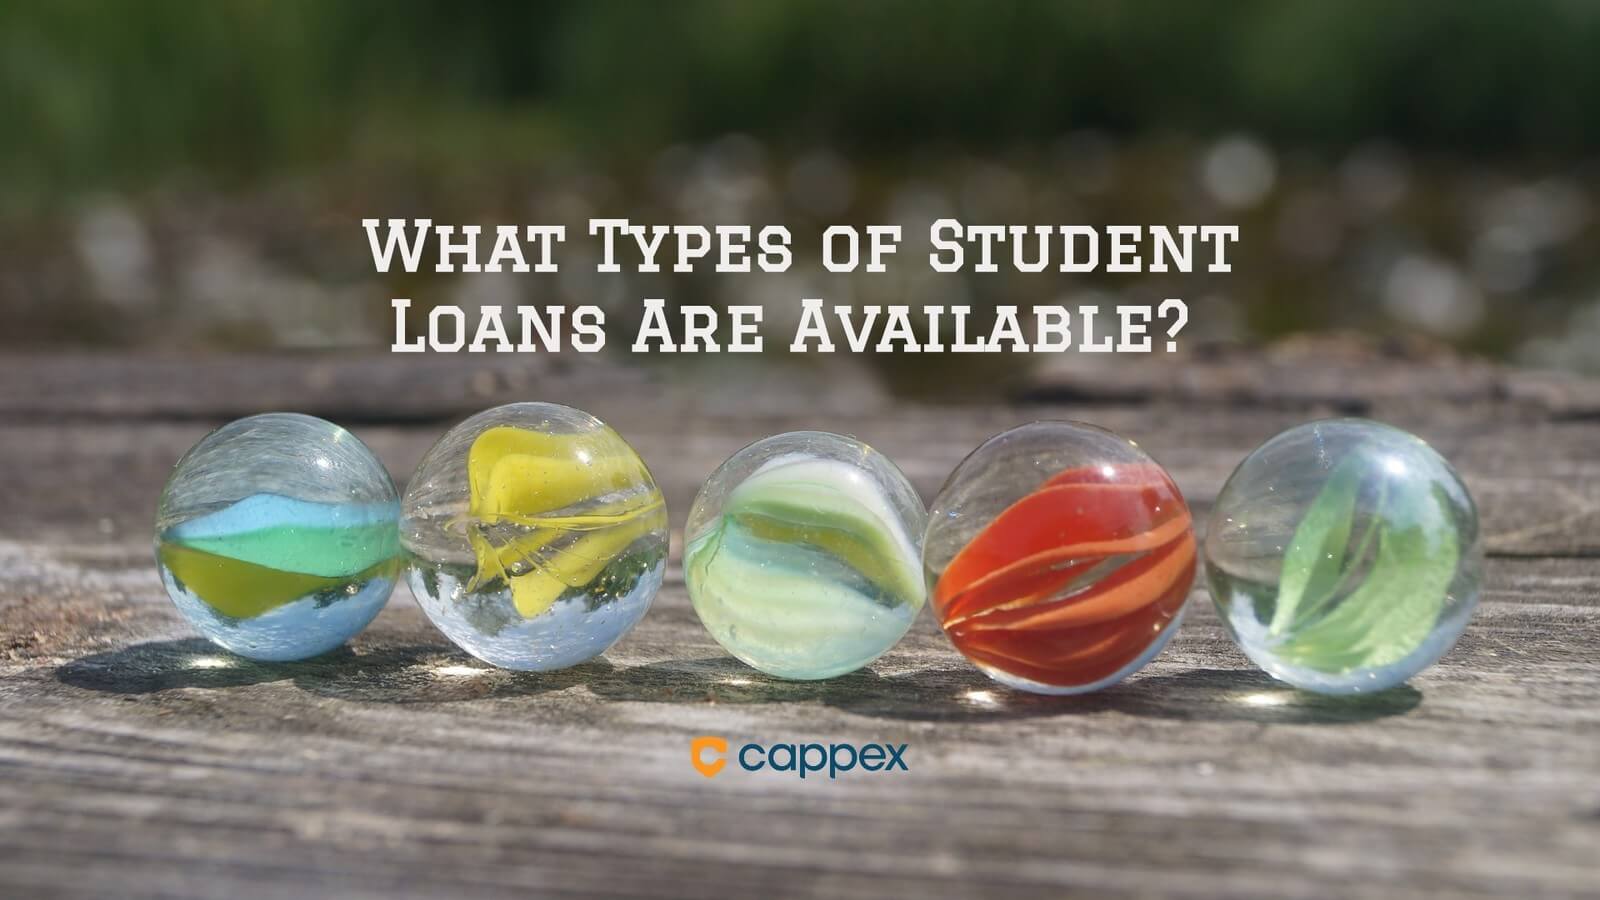 What Types of Student Loans Are Available?